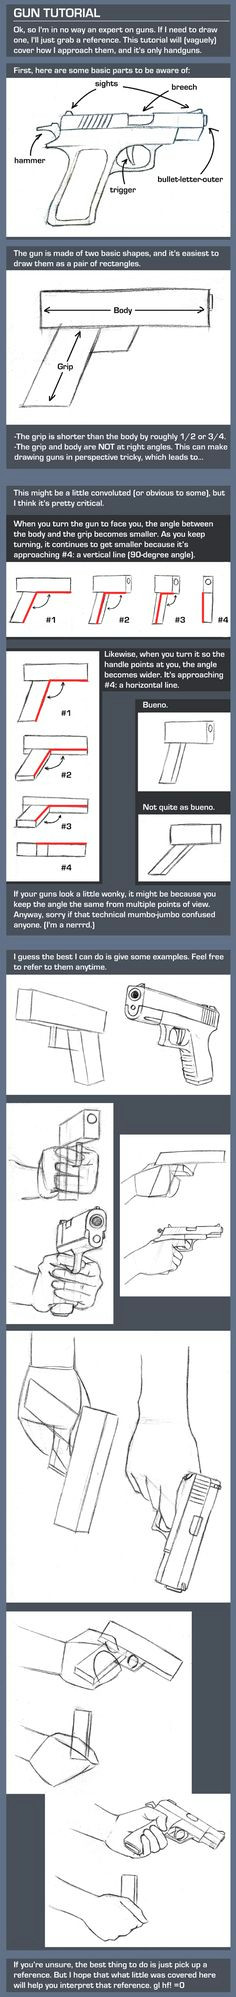 Drawing Easy Guns 57 Best Draw Weapons Images Guns Firearms Manga Drawing